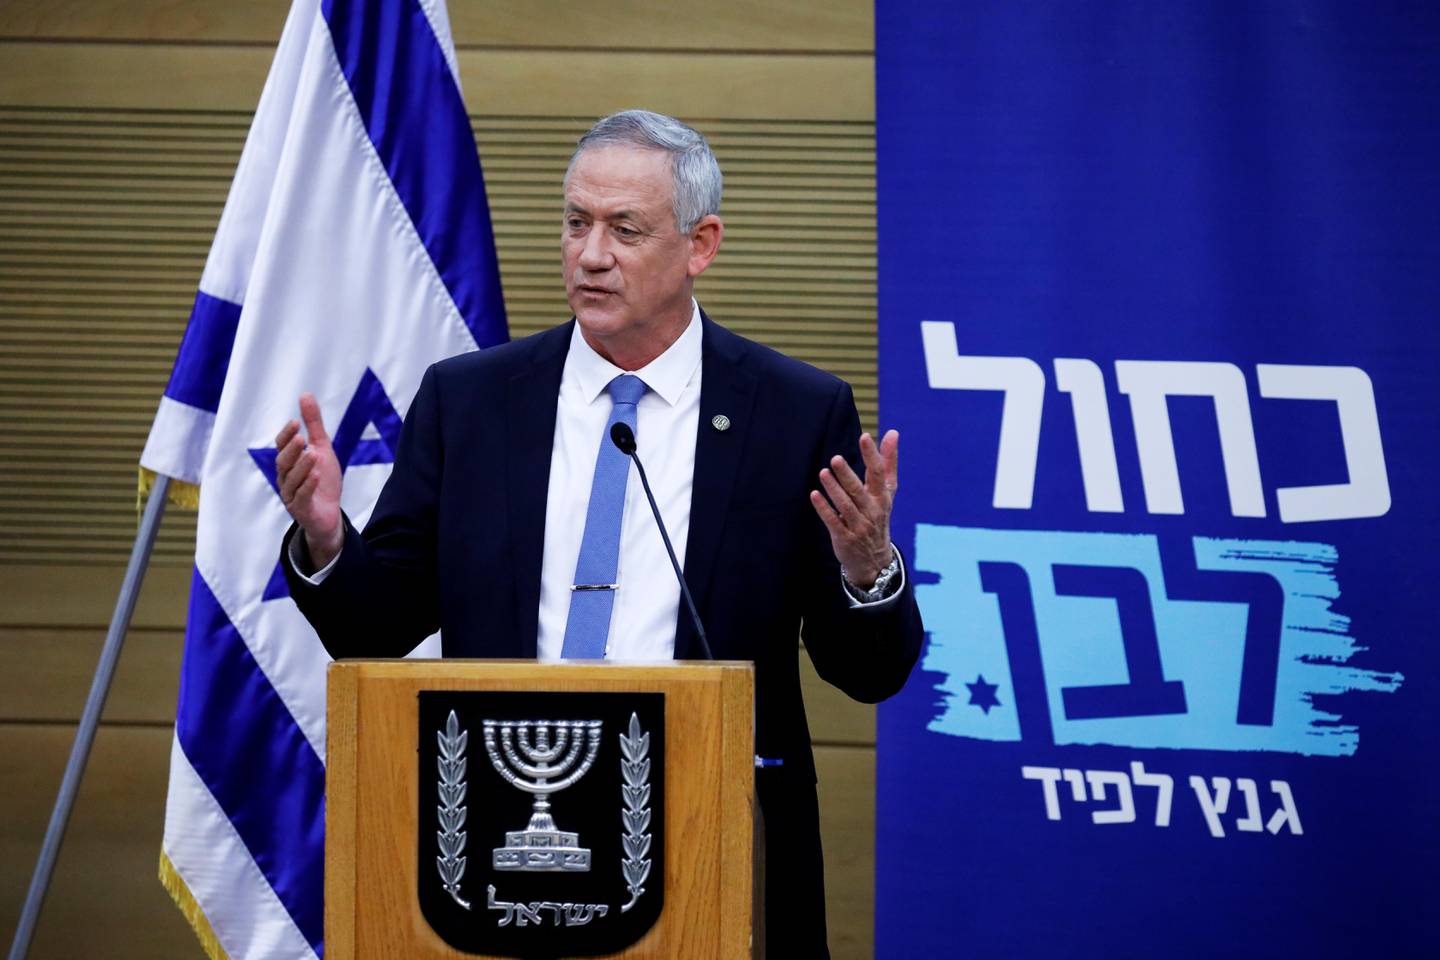 Benny Gantz, leader of Blue and White party, delivers a statement during the party faction meeting at the Knesset, Israel's parliament, in Jerusalem November 25, 2019. REUTERS/Amir Cohen